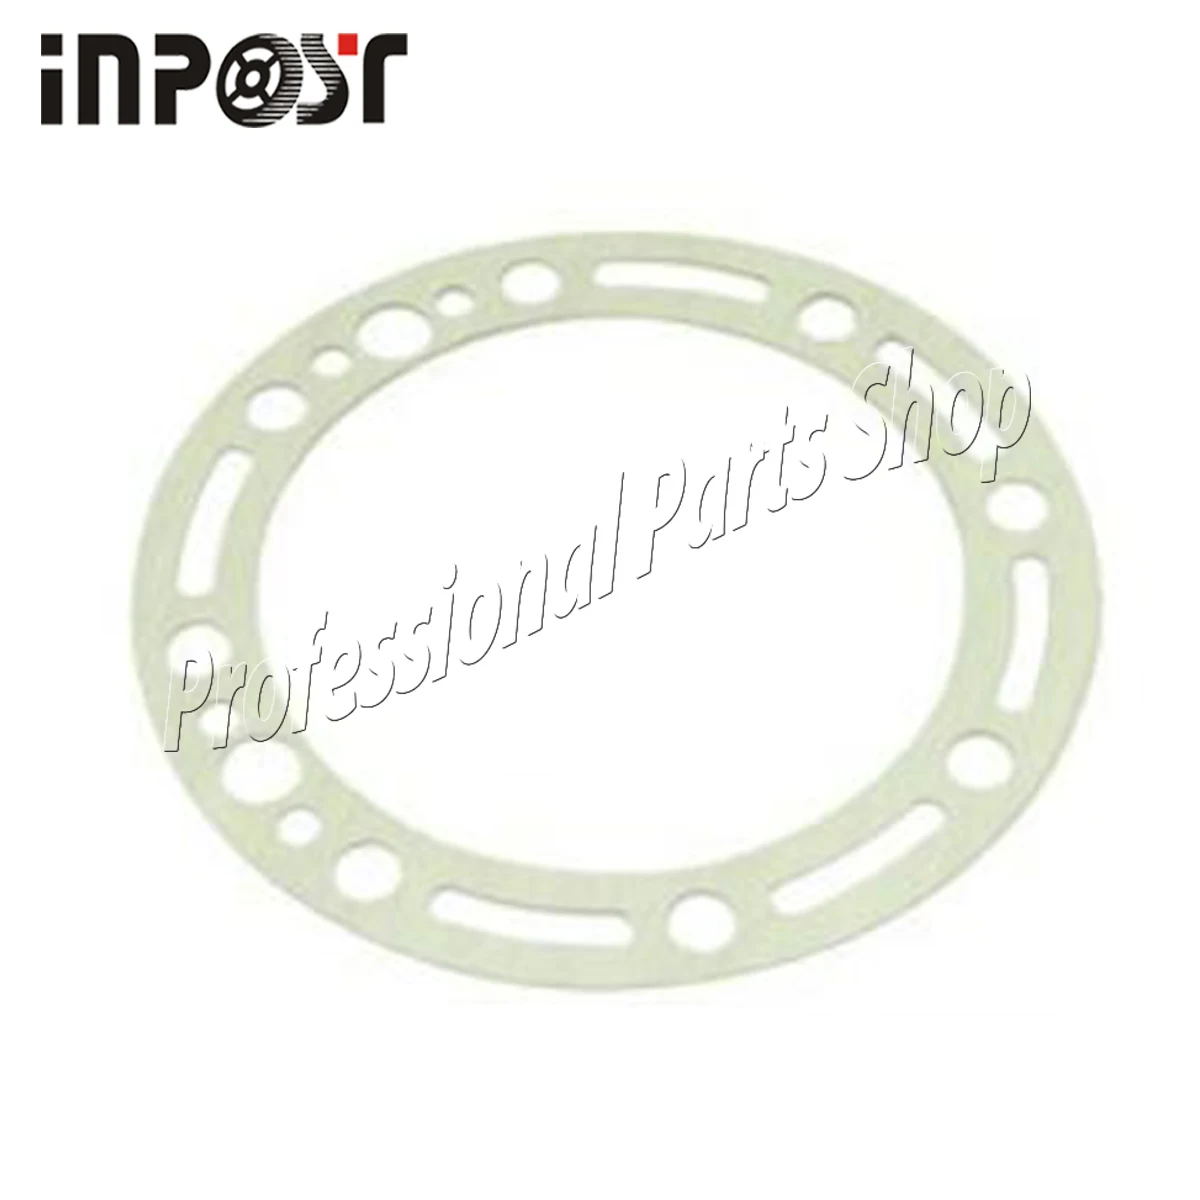 

33-0110 Gasket Oil Pump for Thermo King Compressor X426 / X430